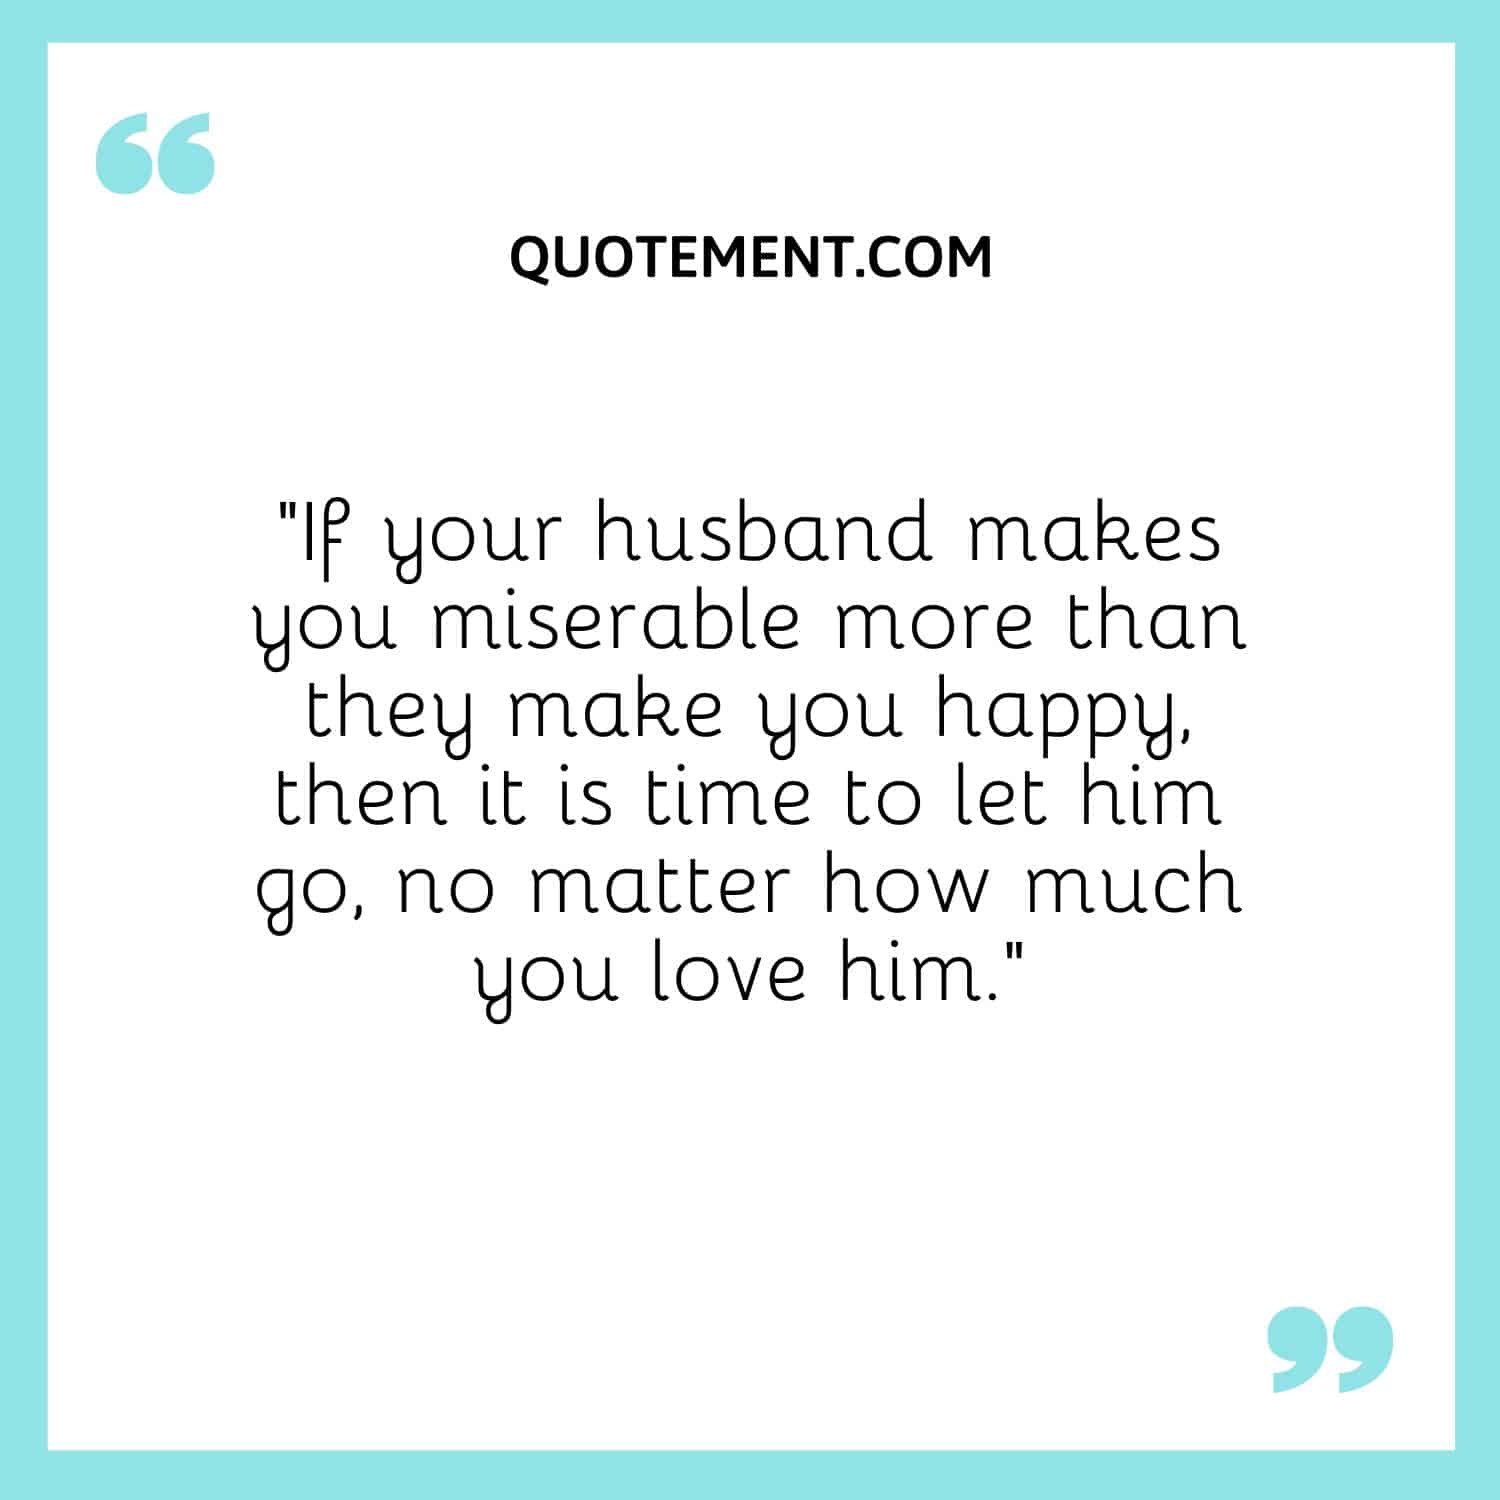 If your husband makes you miserable more than they make you happy, then it is time to let him go